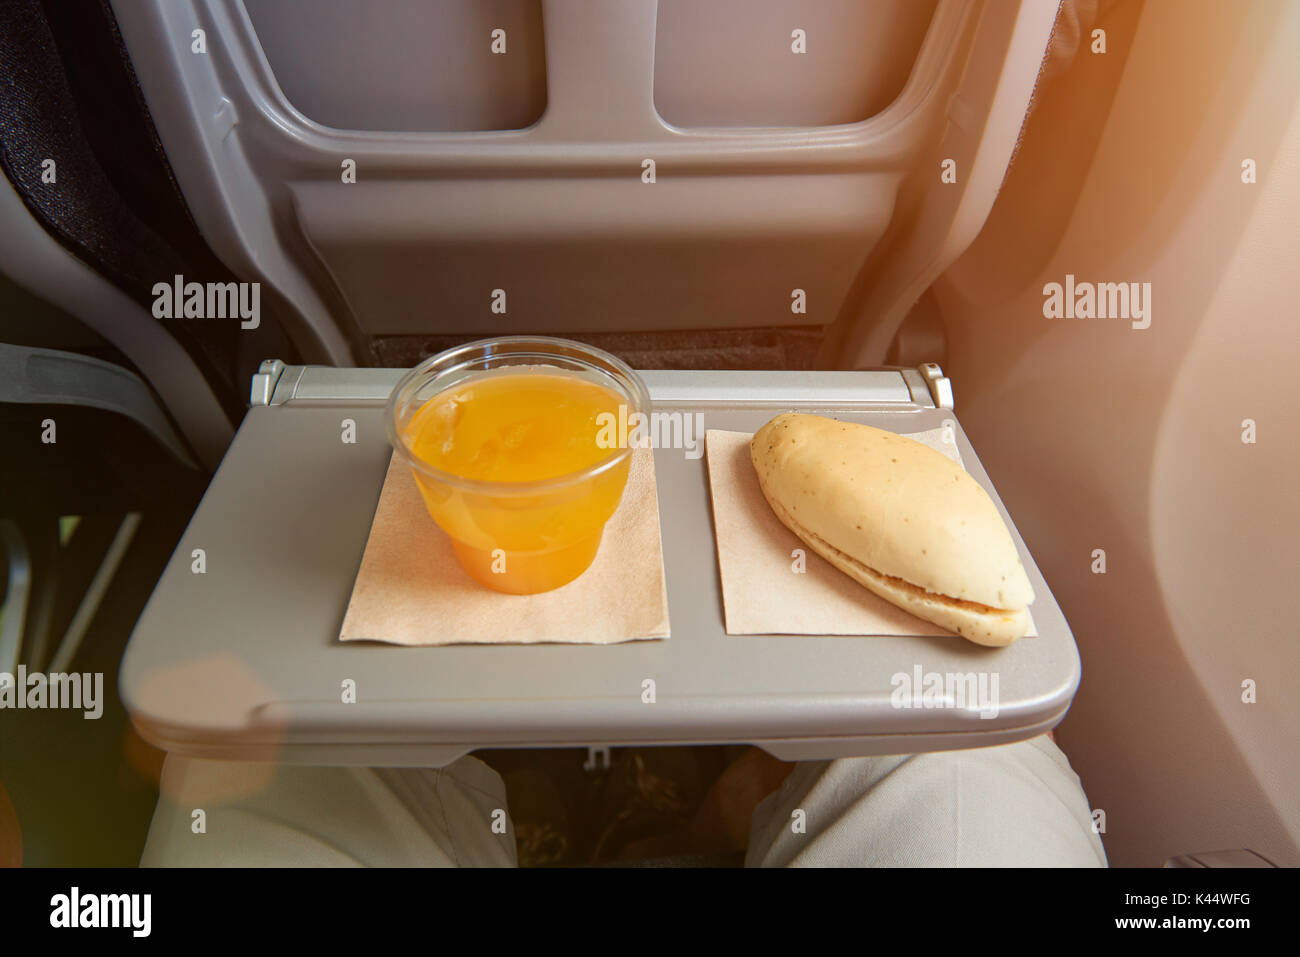 Small meal in airplane back seat table. Cup of orange juice and sandwich Stock Photo